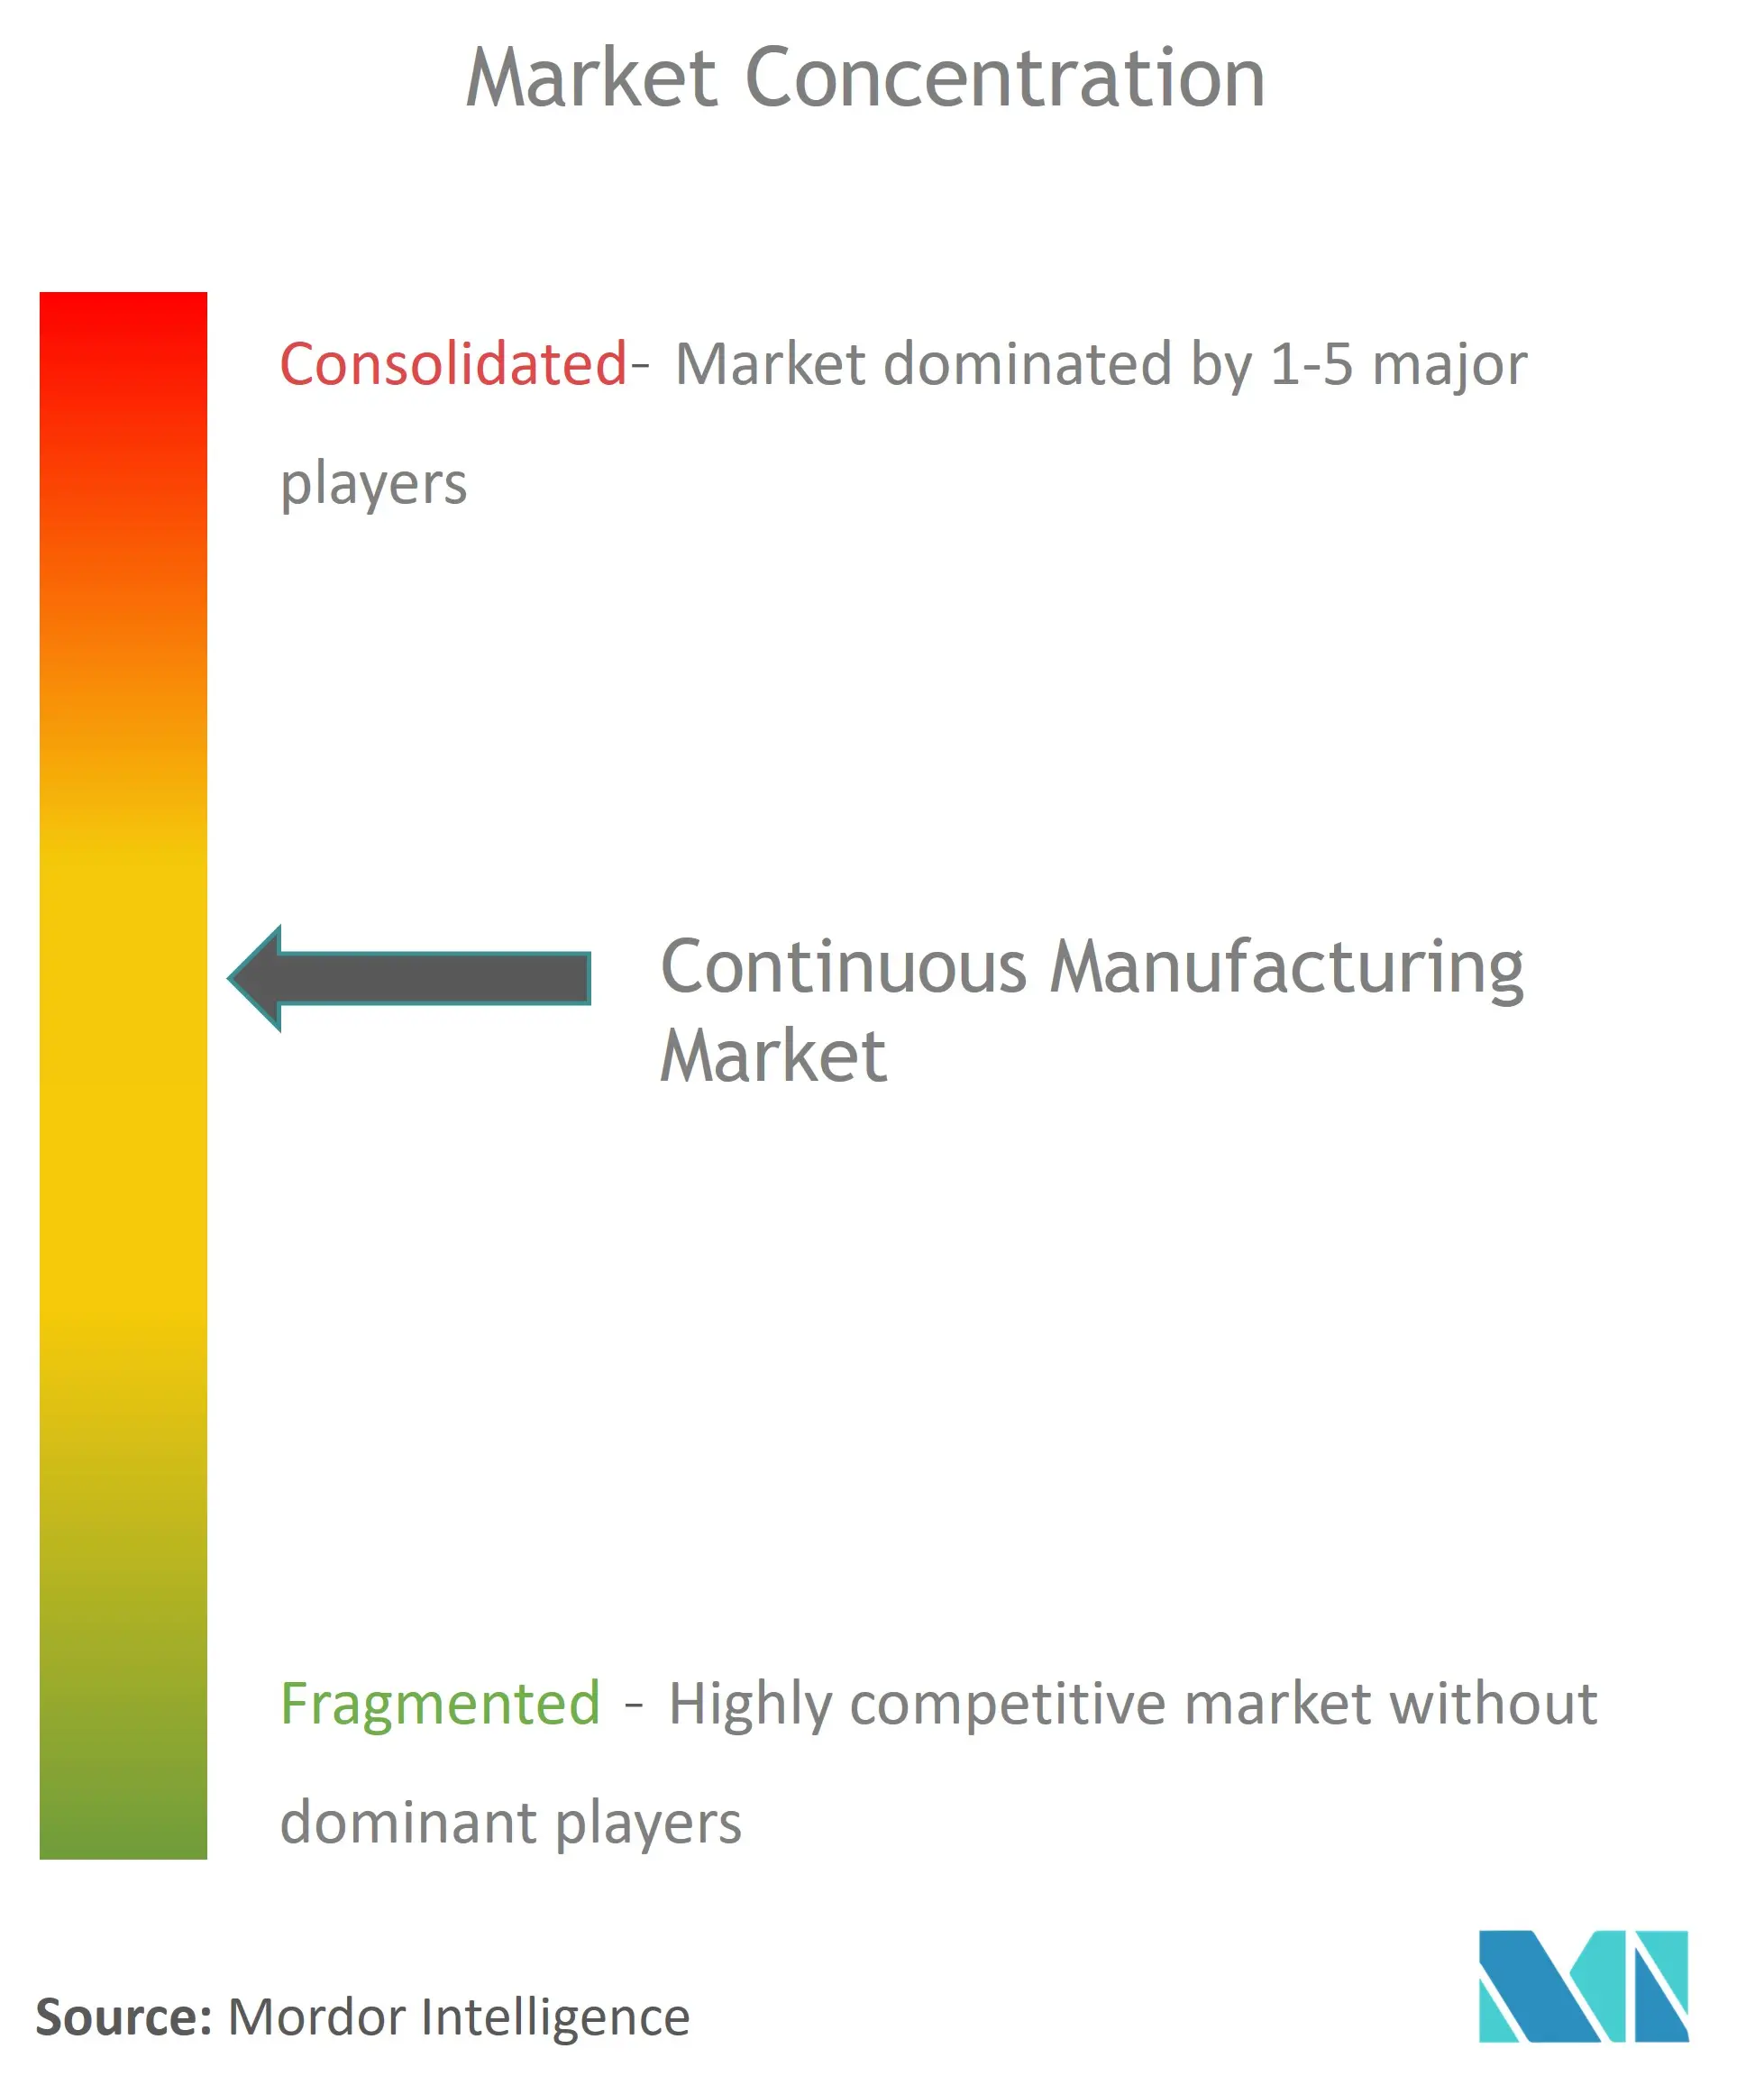 Continuous Manufacturing Market Concentration